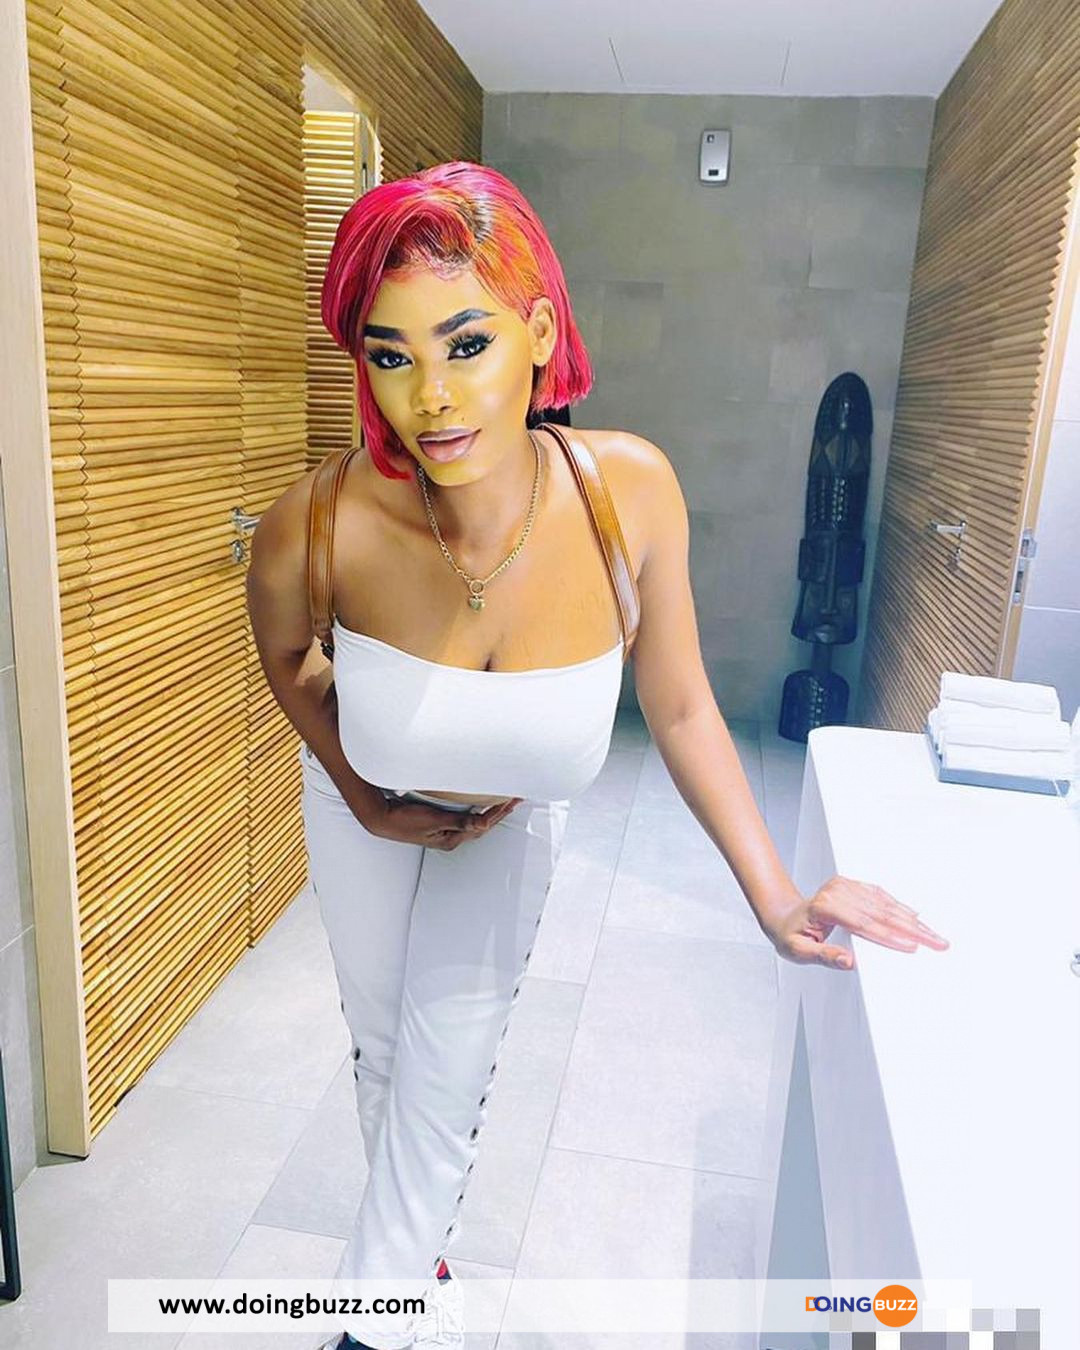 I was sexually attracted to Bobrisky while working with her - Kyme Oye, la jeune femme qui fait le buzz actuellement